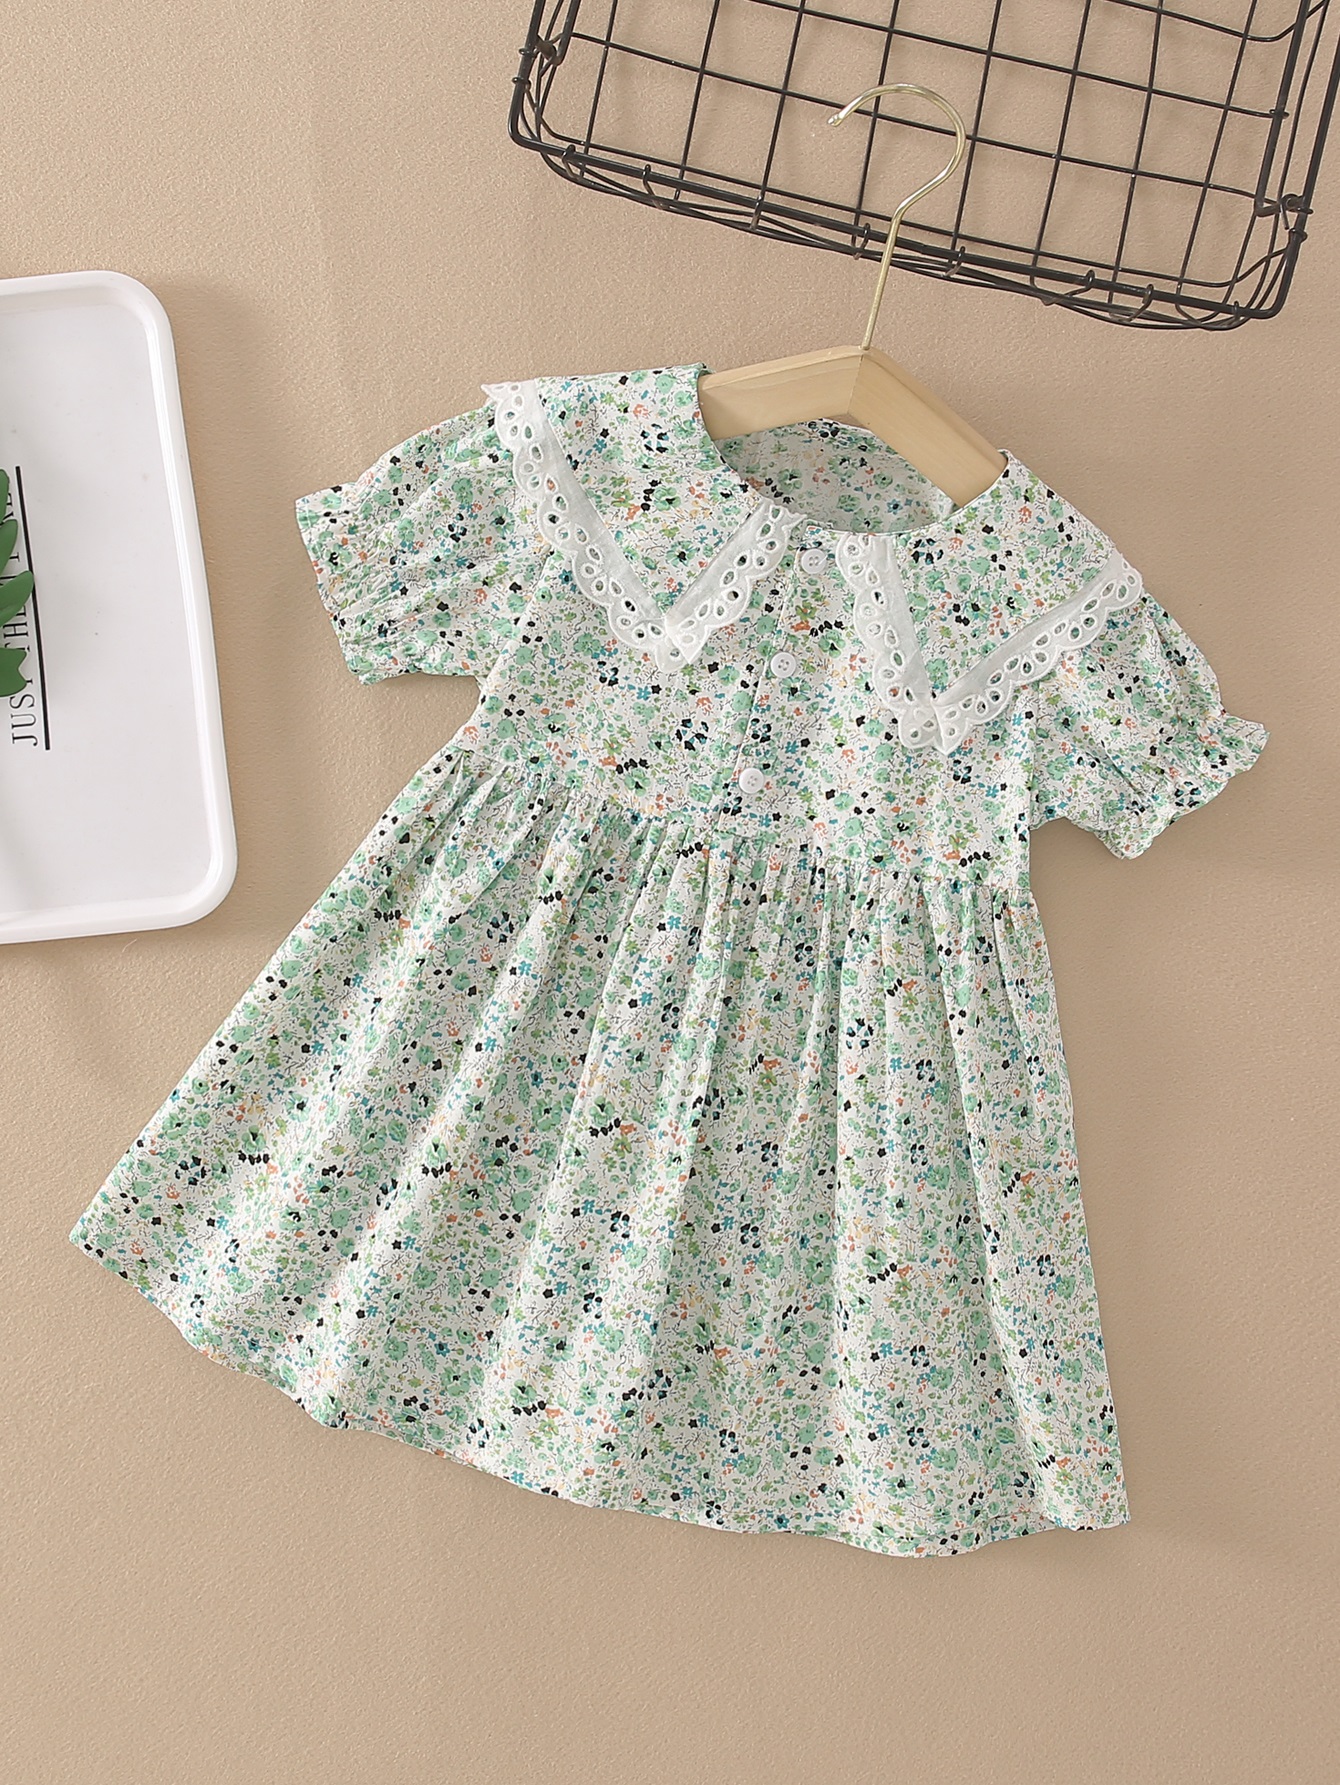 baby Toddler girls cotton dress uk patterns preppy kids dresses with button small MOQ